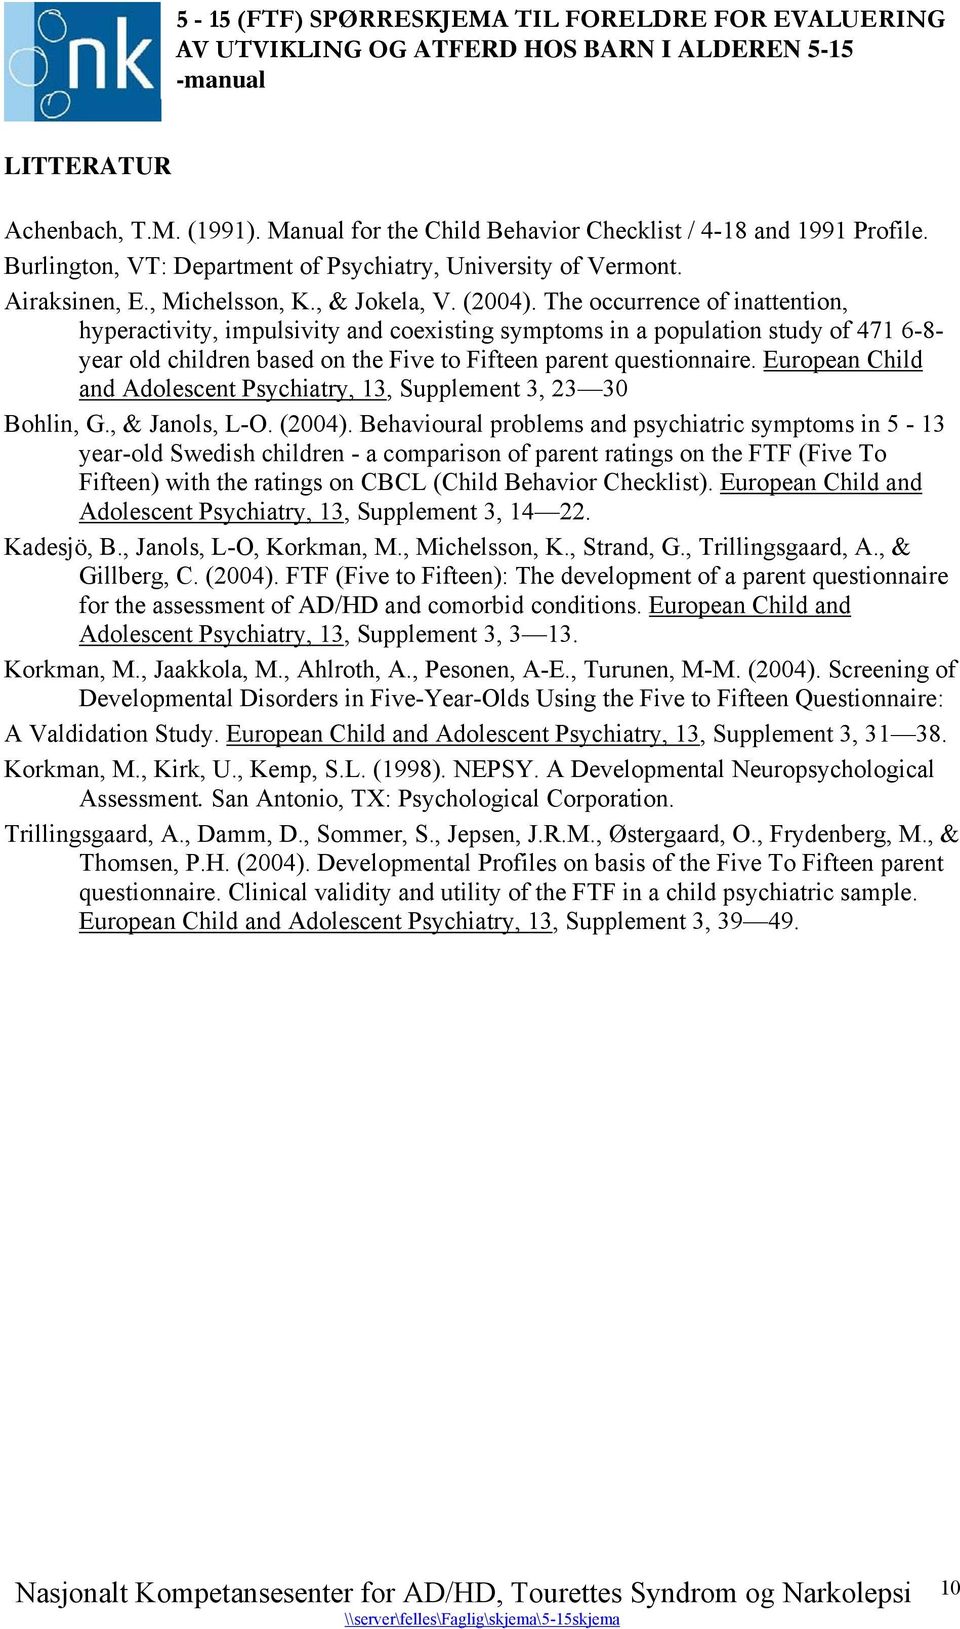 The occurrence of inattention, hyperactivity, impulsivity and coexisting symptoms in a population study of 471 6-8- year old children based on the Five to Fifteen parent questionnaire.